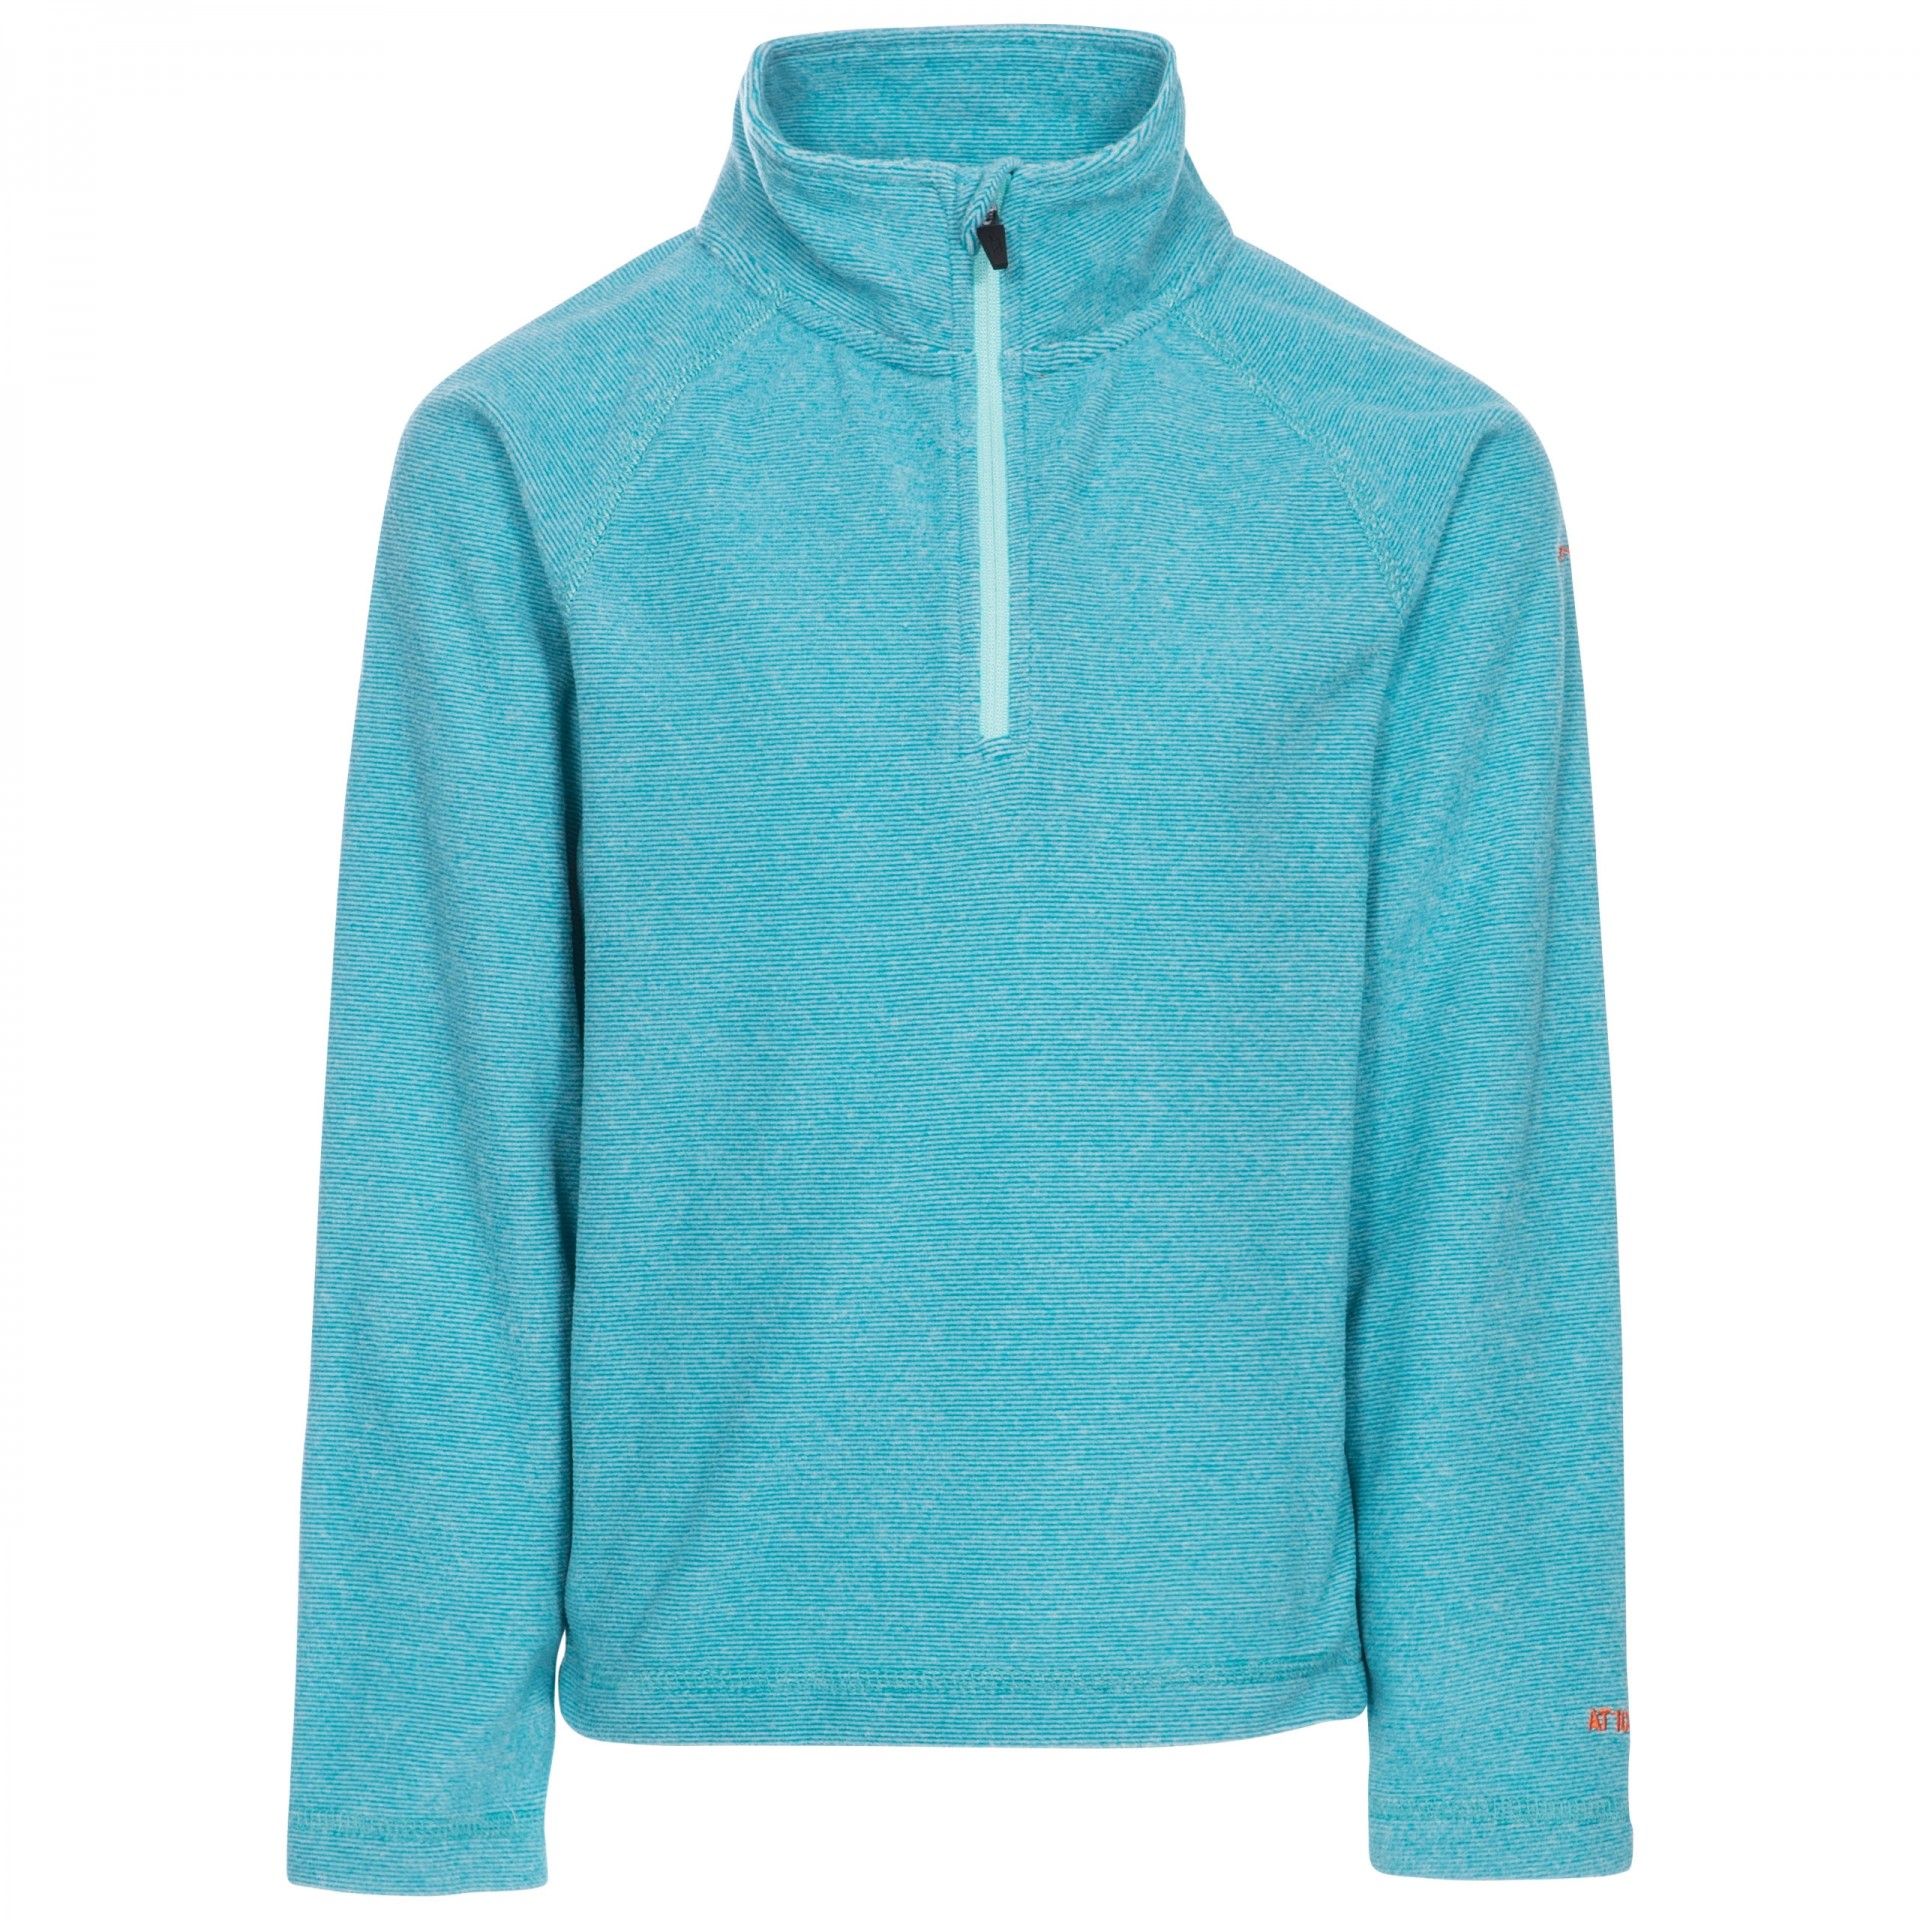 100% polyester. Striped microfleece. Anti piling. Brushed back. 1/2 zip neck. Contrast trims.